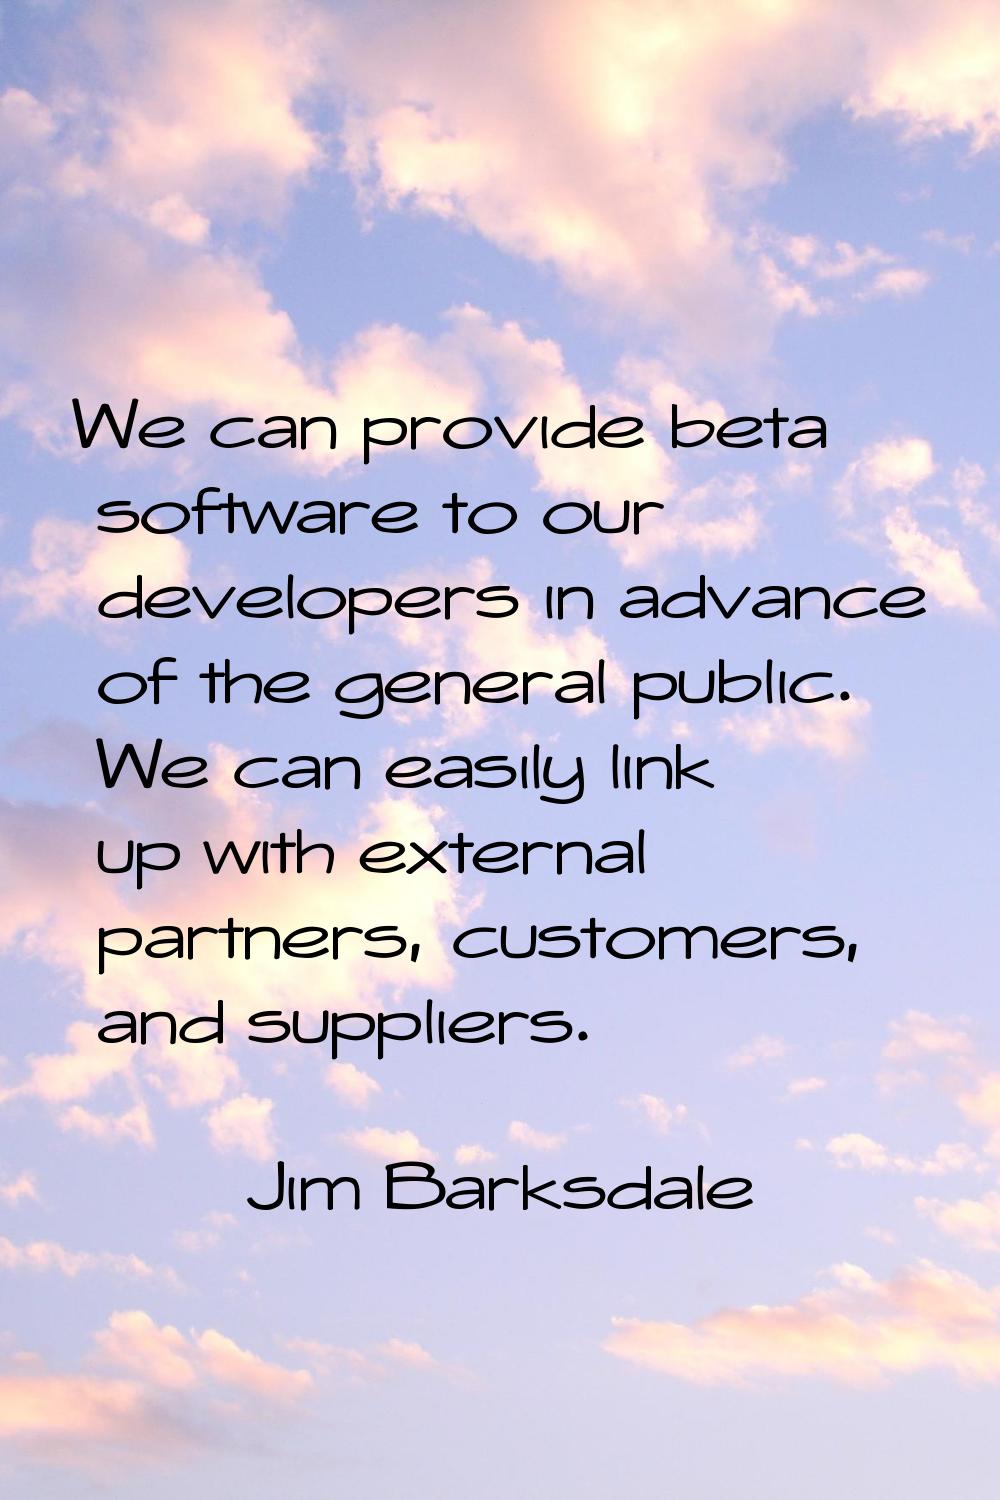 We can provide beta software to our developers in advance of the general public. We can easily link